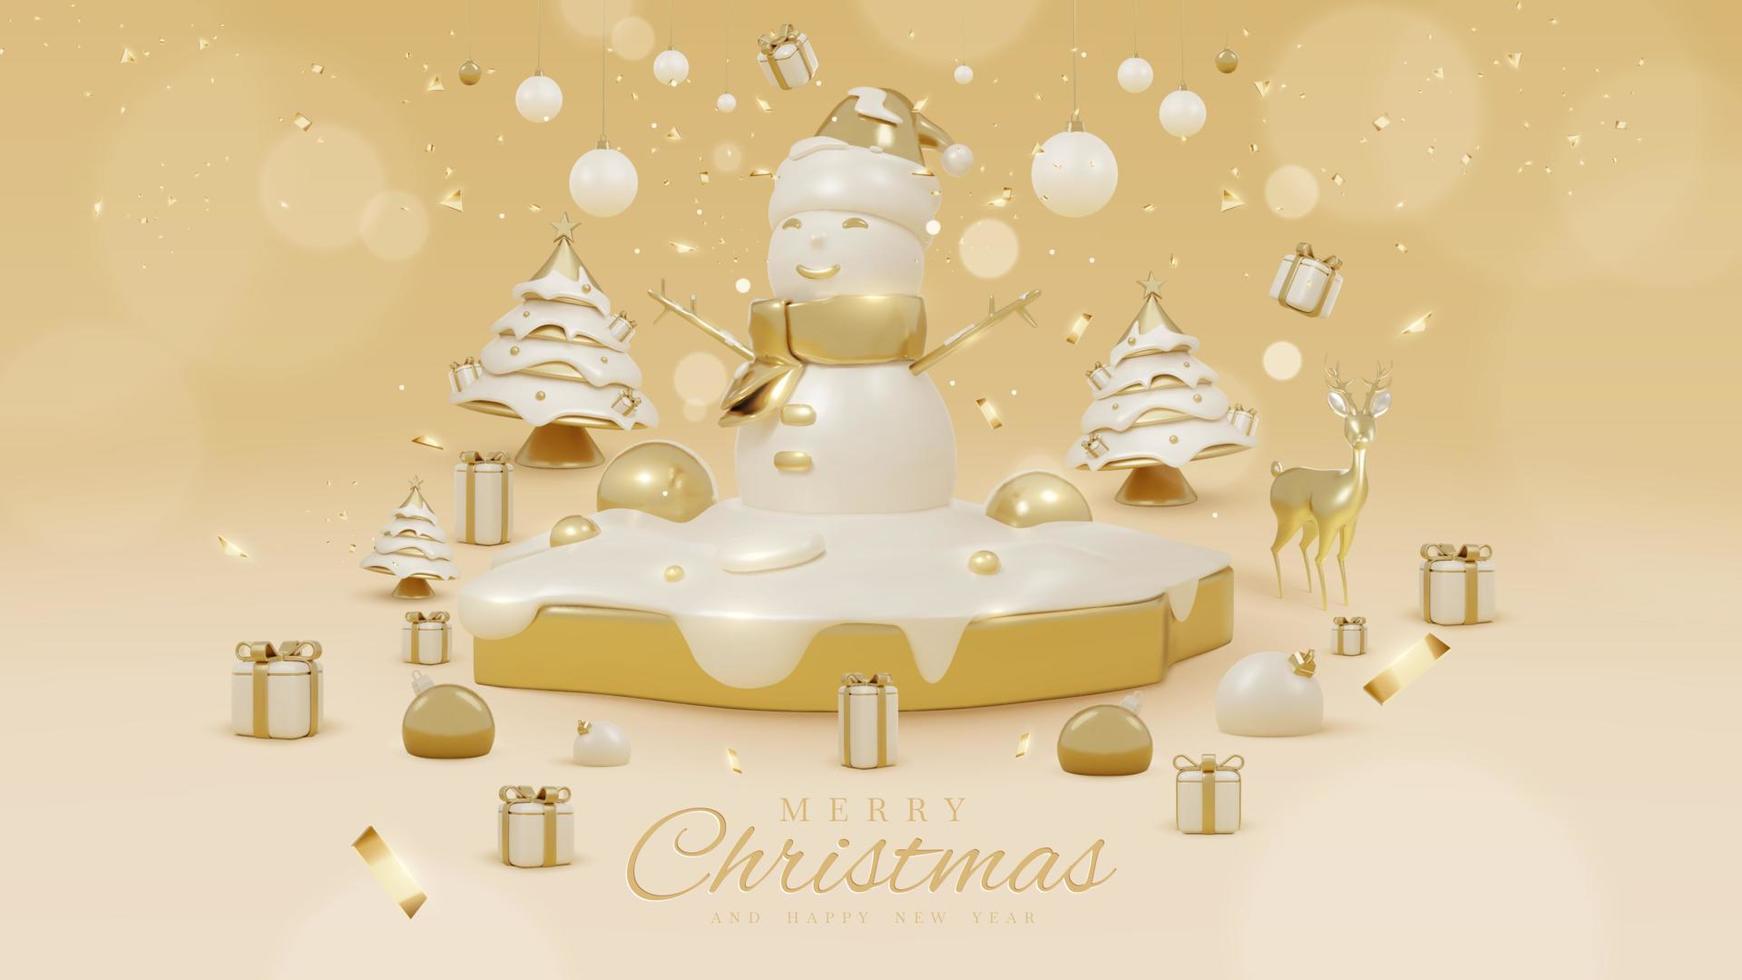 Luxury background with snowman on golden podium and snow elements with 3d realistic christmas ornaments and sparkling light effect decorations and bokeh. Vector illustration.